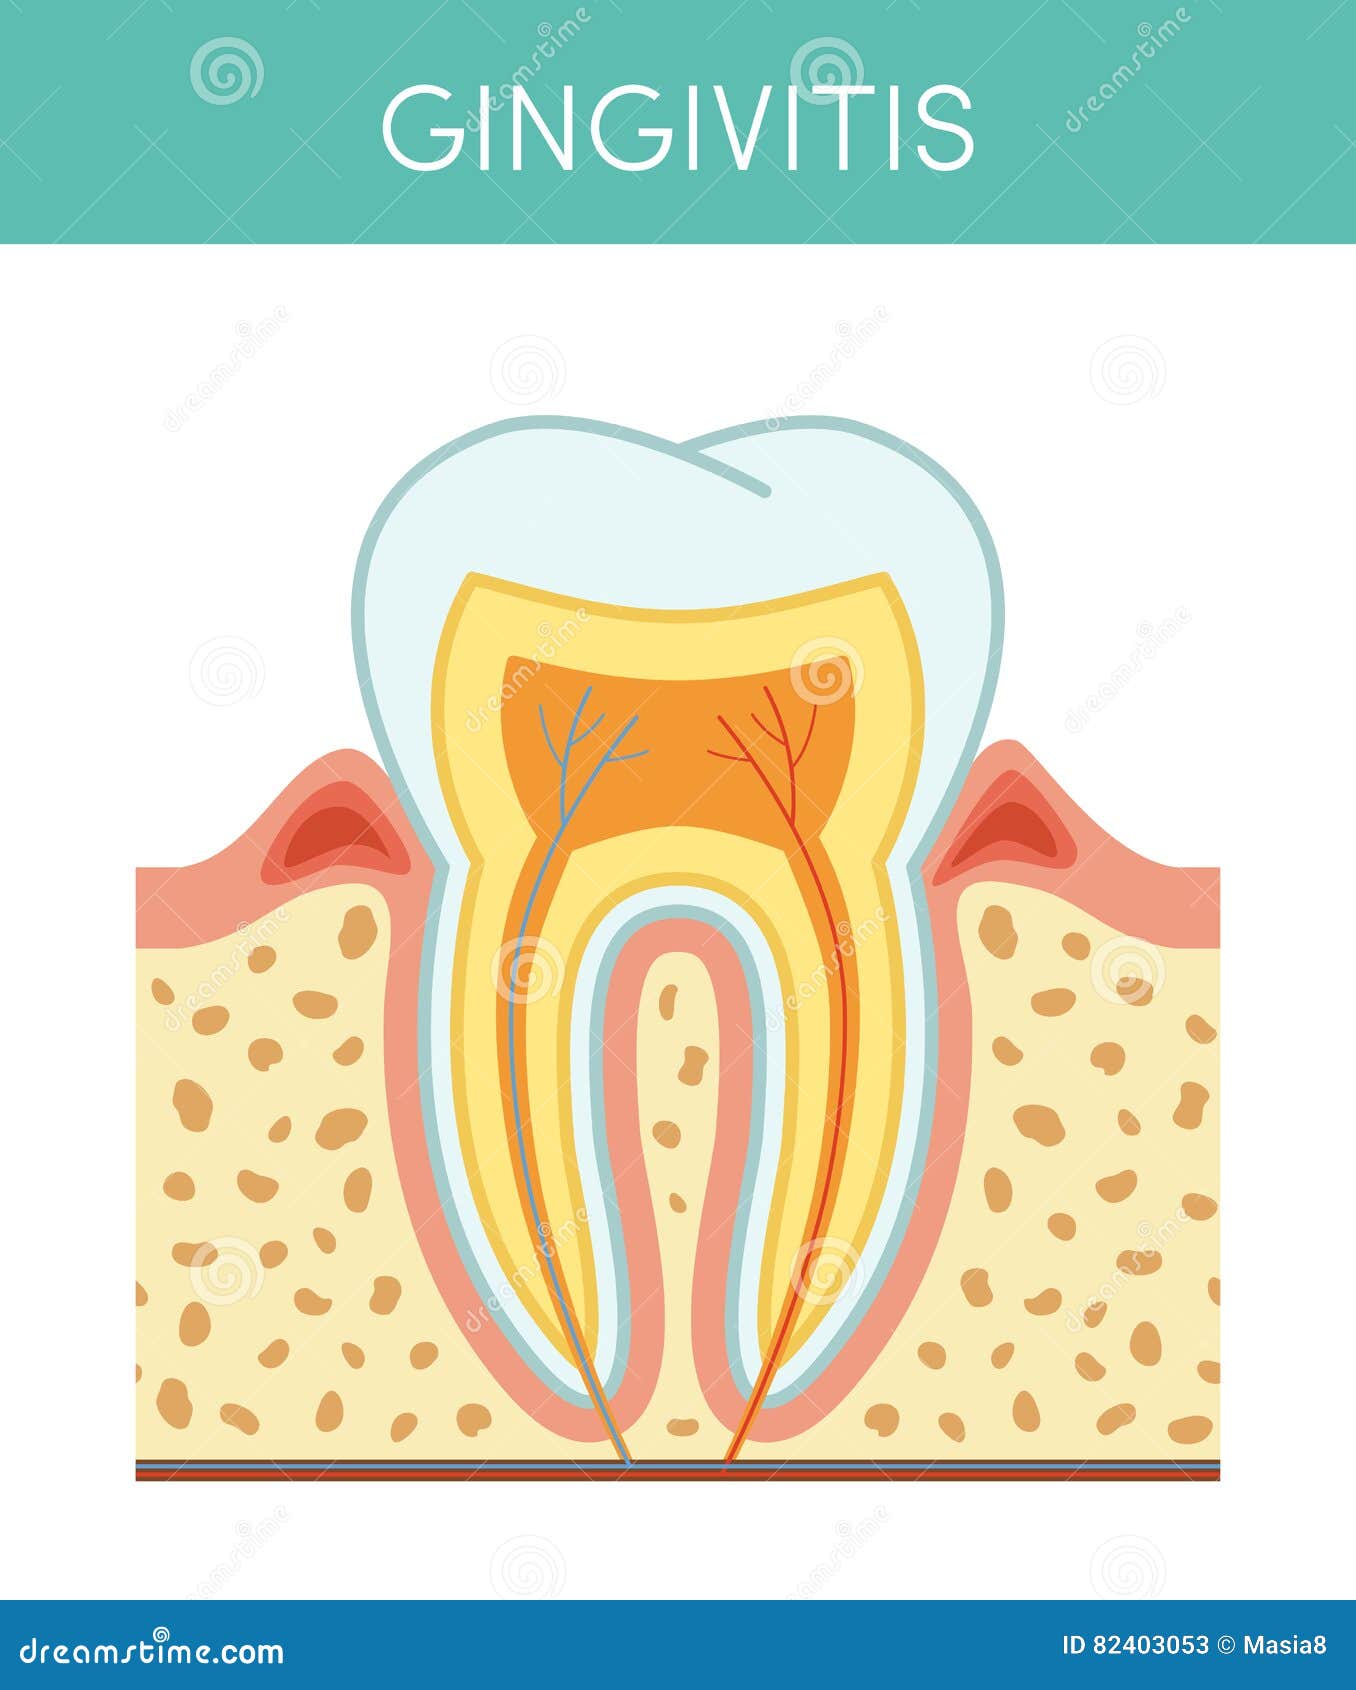 tooth with gingivitis